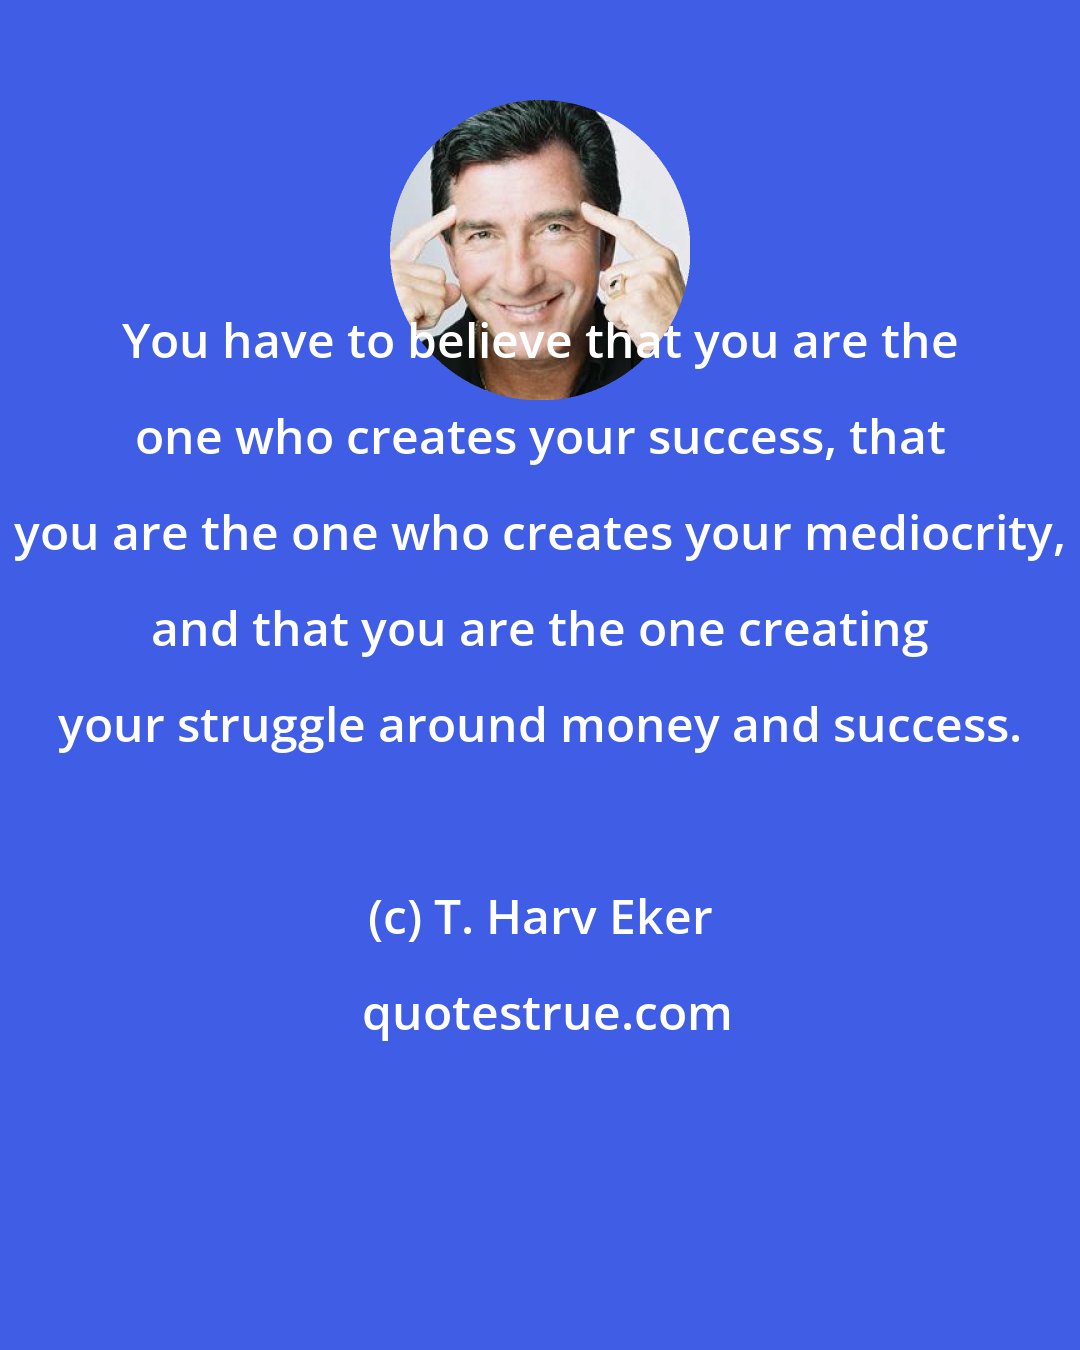 T. Harv Eker: You have to believe that you are the one who creates your success, that you are the one who creates your mediocrity, and that you are the one creating your struggle around money and success.